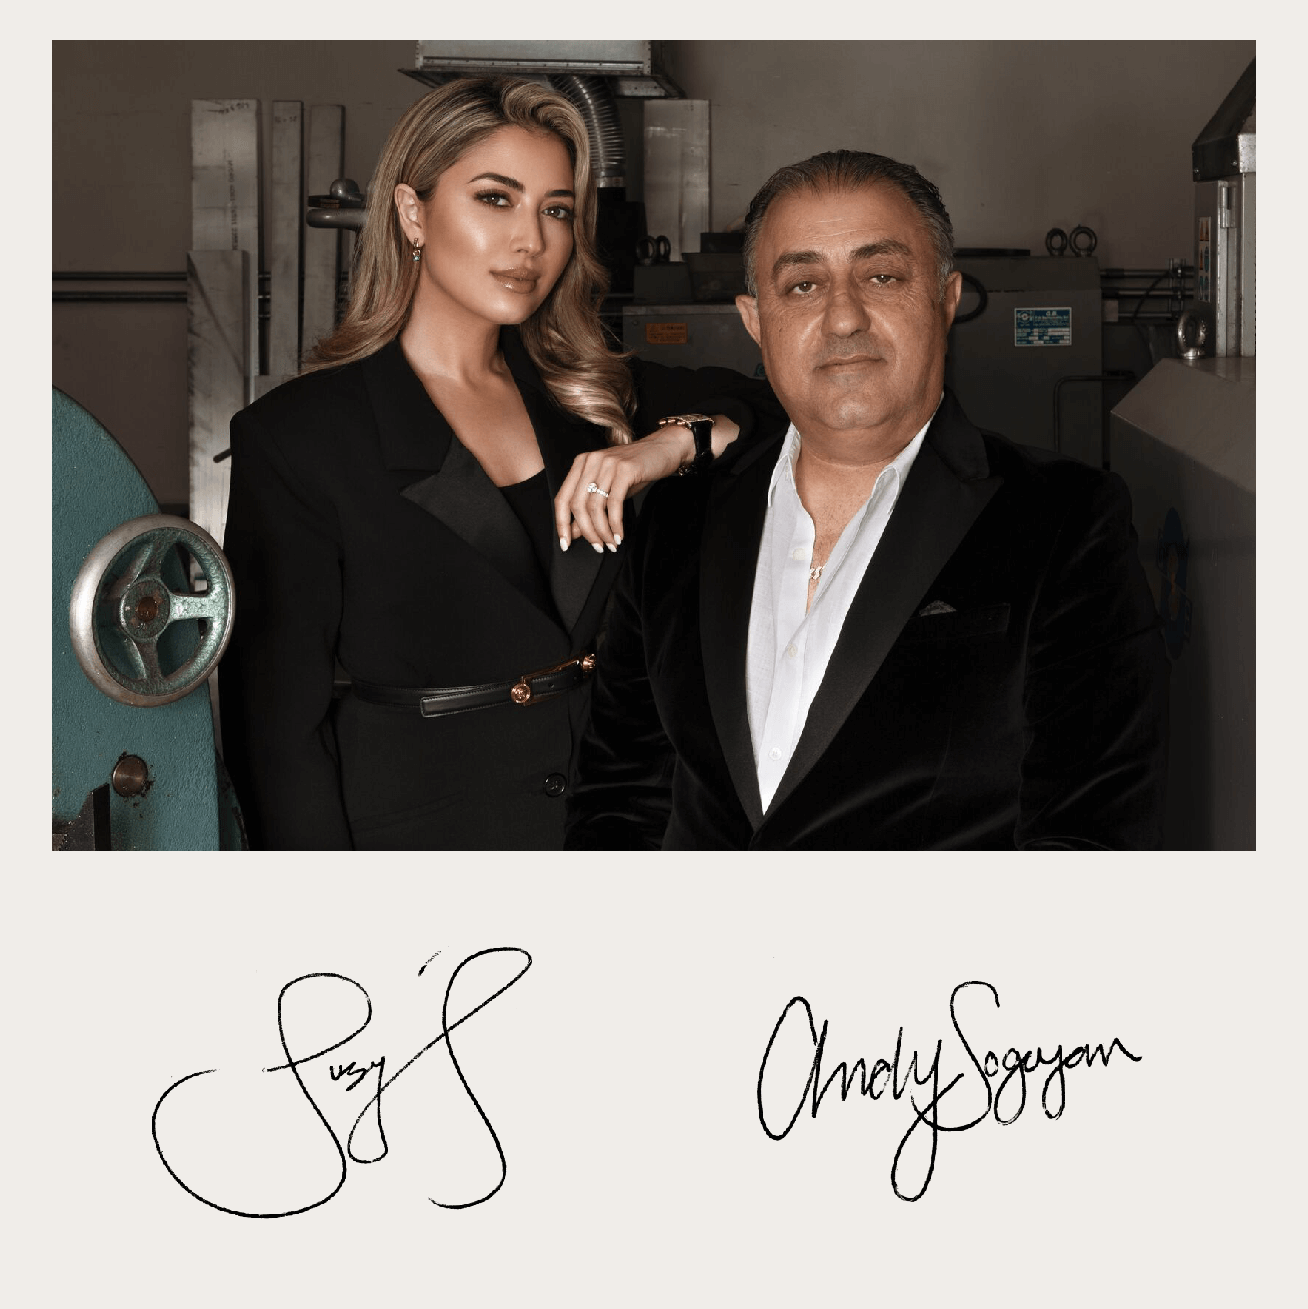 Pictured here are Suzy Sogoyan, Director of Brand Development and her father.